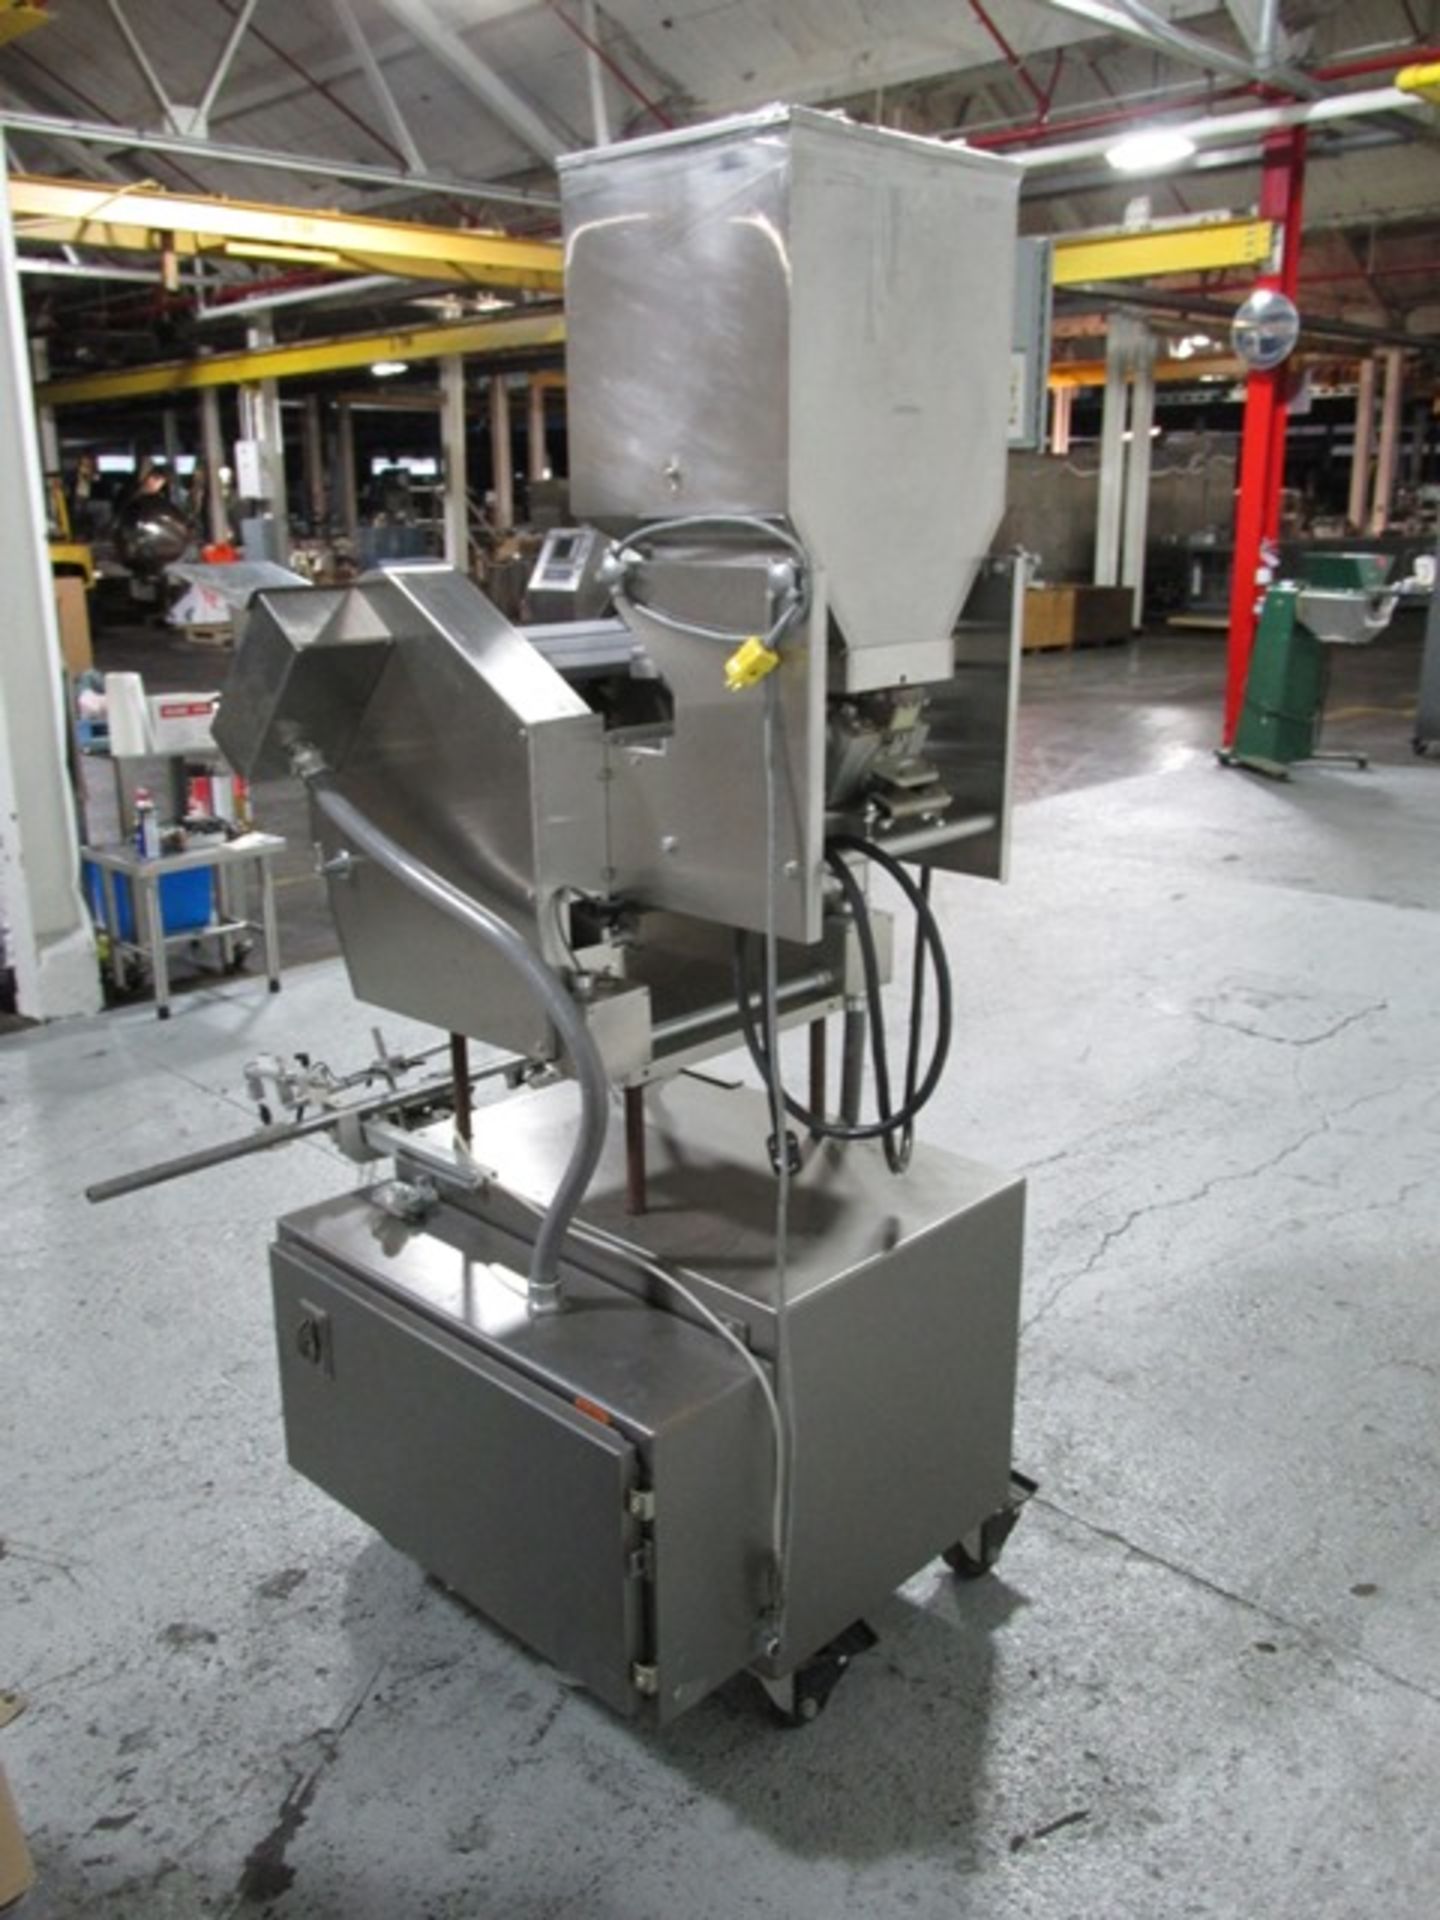 Lakso Reformer 300 slat counter, model 93, stainless steel feed hopper, mach# 326 - Image 4 of 15